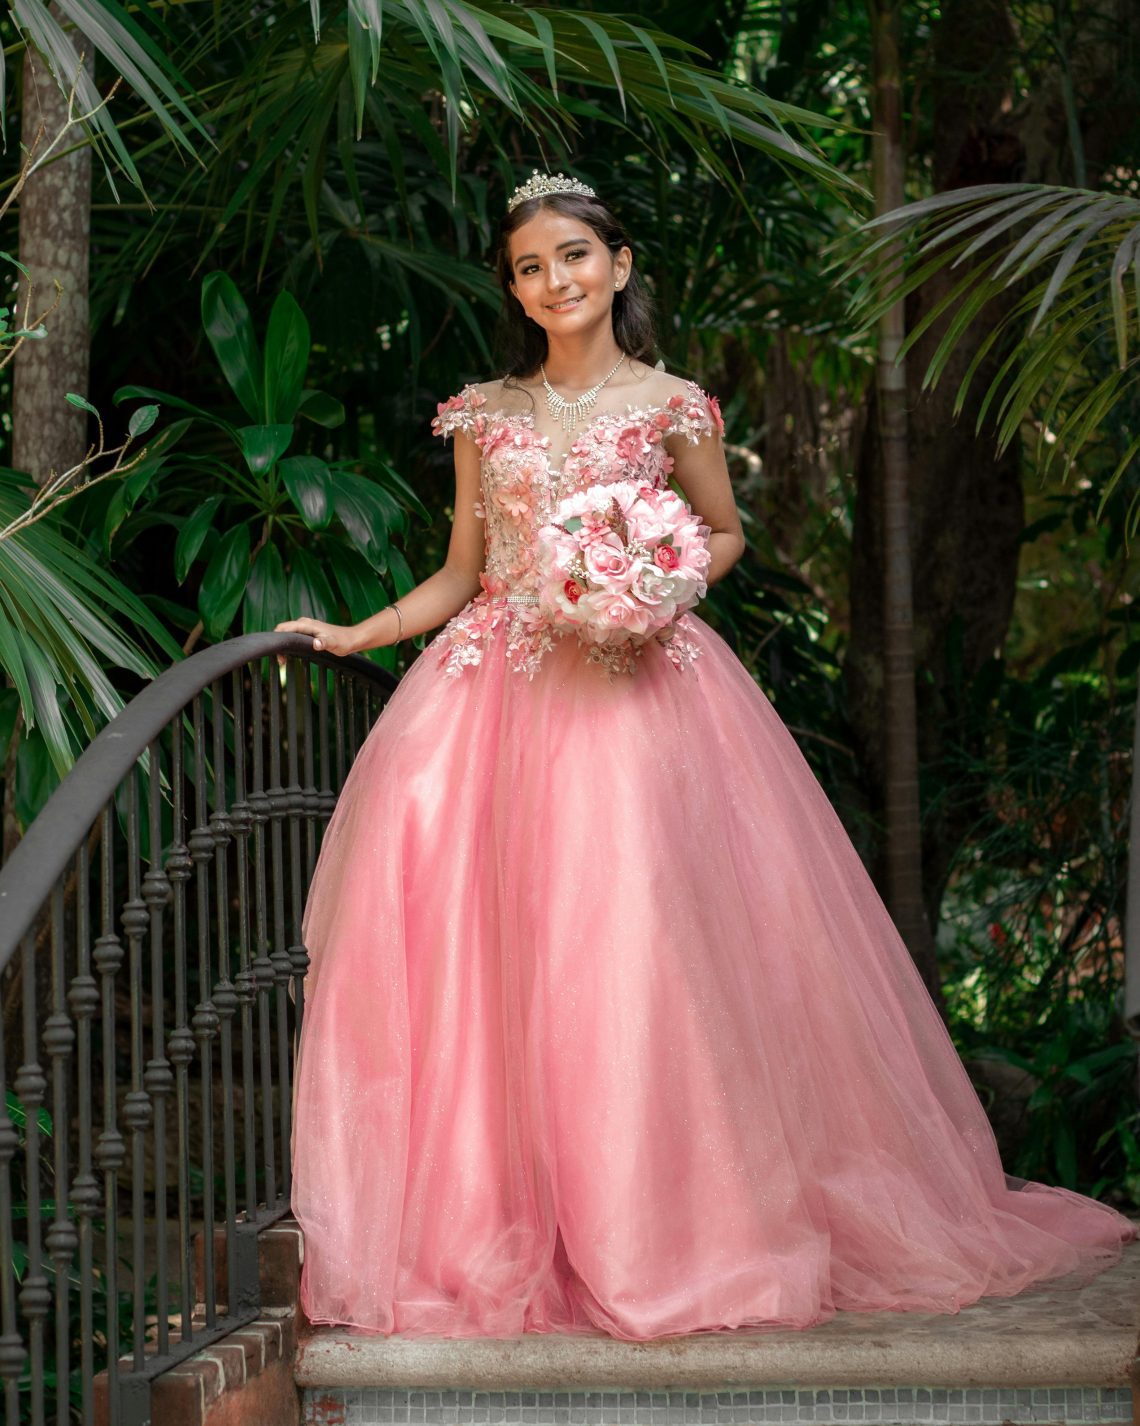 8 Tips to Find a Unique, One-of-a-Kind Prom Dress